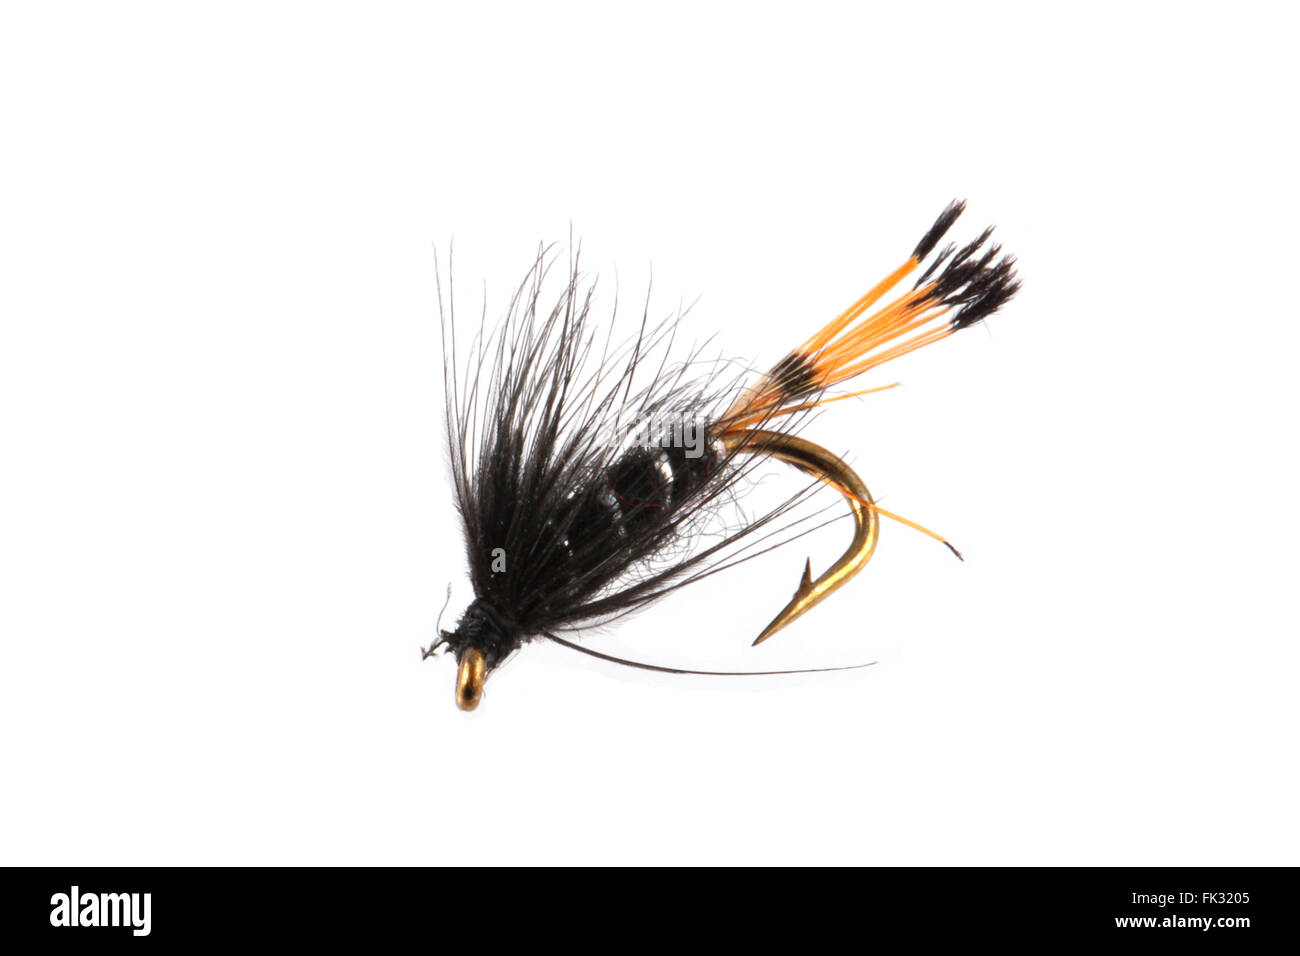 Handmade flies used by fishermen to attract trout and salmon by game fishermen. Stock Photo